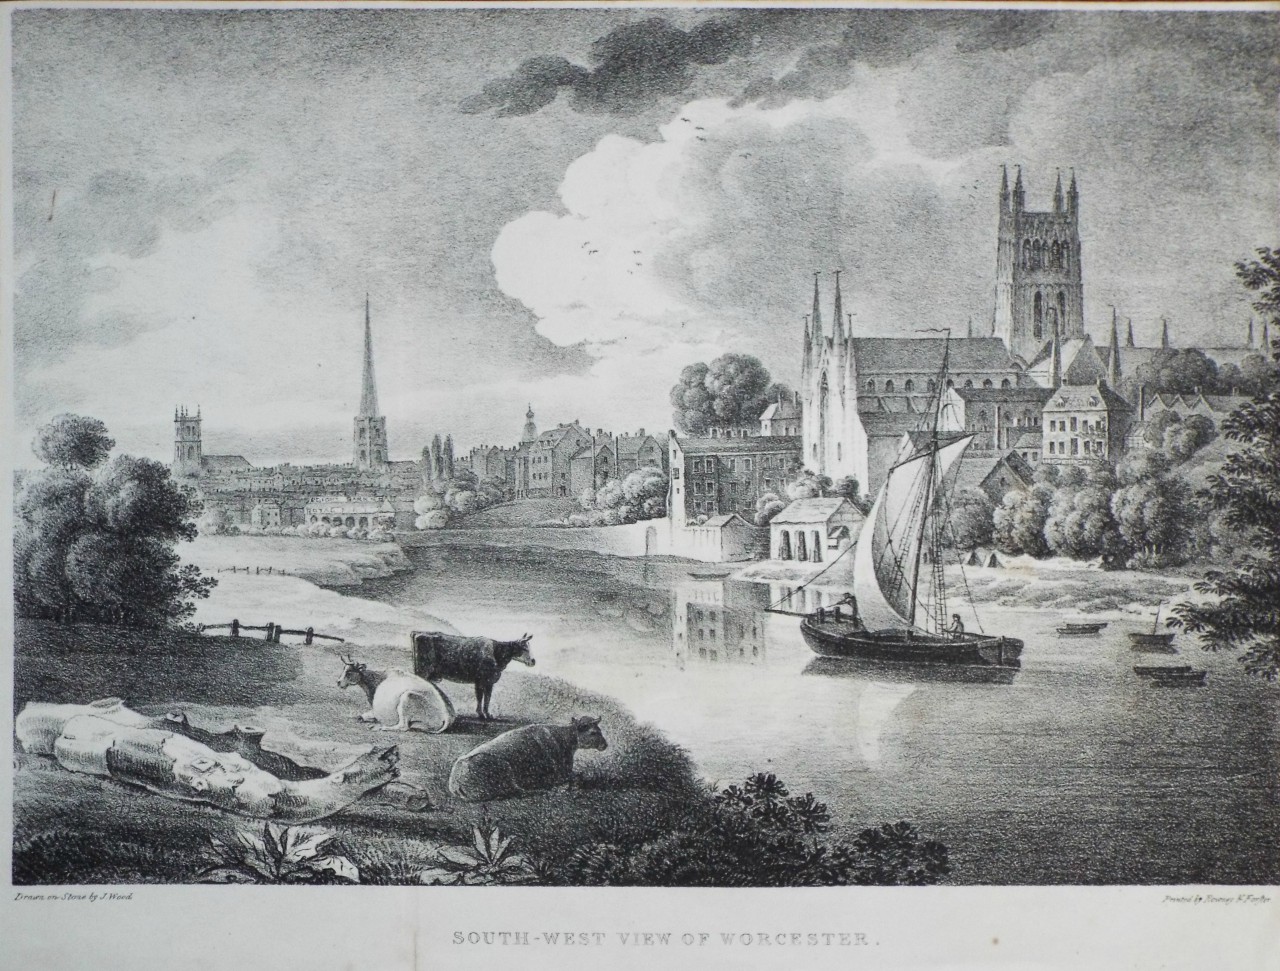 Lithograph - South-West View of Worcester. - Wood